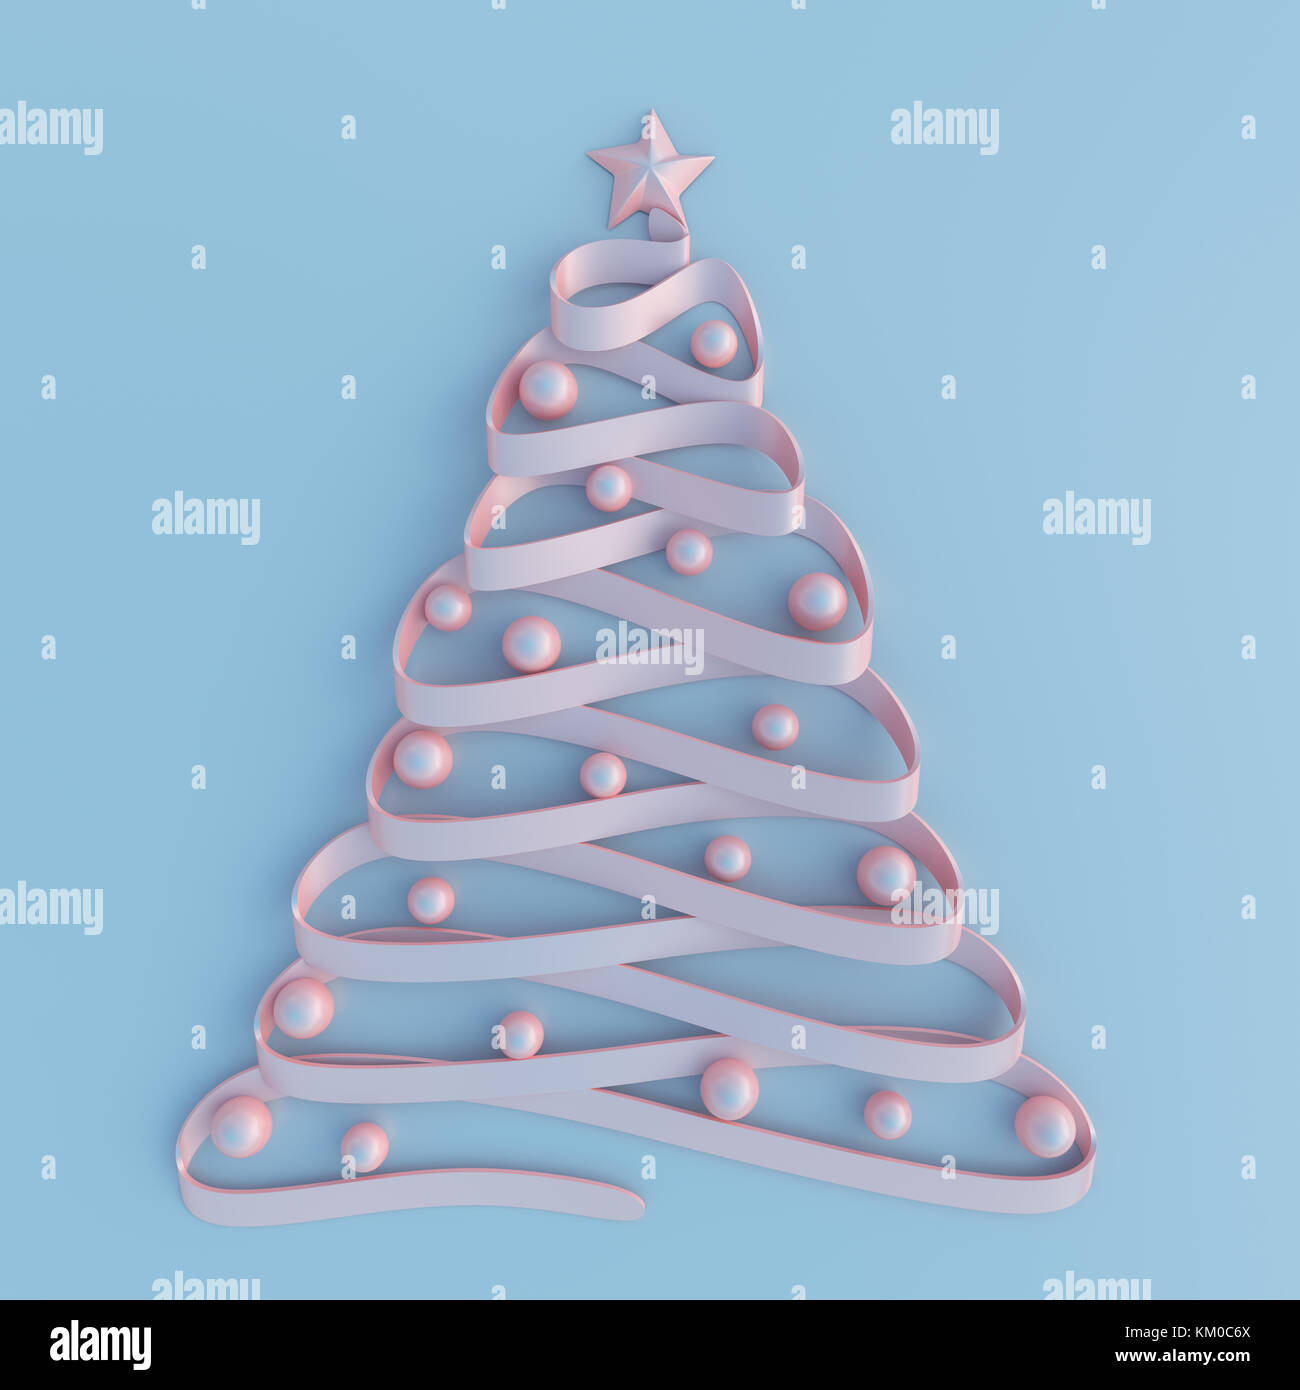 3D illustration. Concept image of a Christmas tree shaped ribbon in pastel colors. Stock Photo